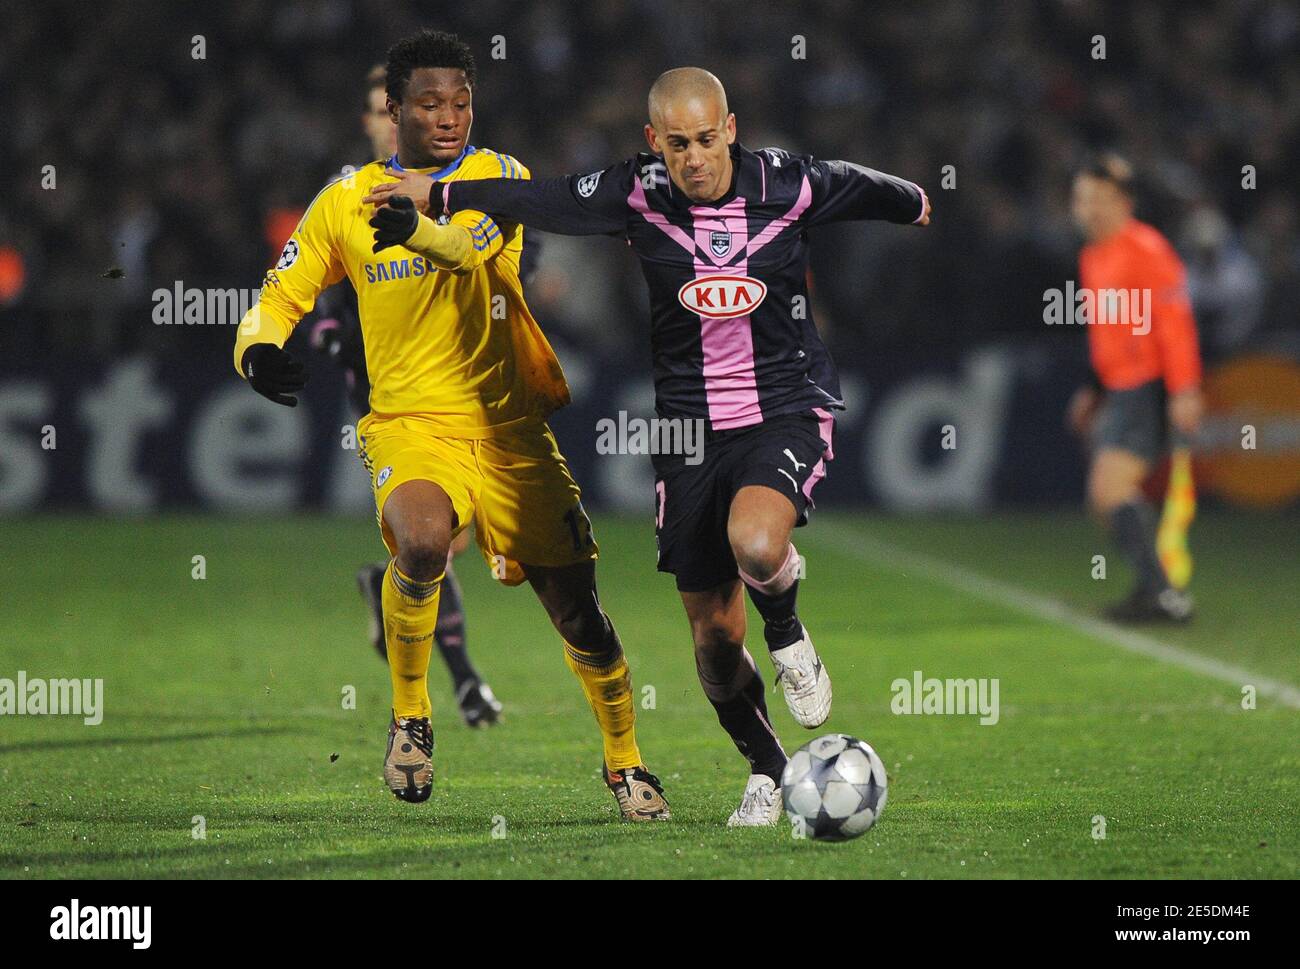 Chelsea's John Mikel Obi battles for the ball with Bordeaux's Wendel during the Champions League soccer match, Girondins de Bordeaux vs Chelsea at the Chaban Delmas stadium in Bordeaux, France on November 26, 2008. The match ended in a 1-1 draw. Photo by Steeve McMay/Cameleon/ABACAPRESS.COM Stock Photo